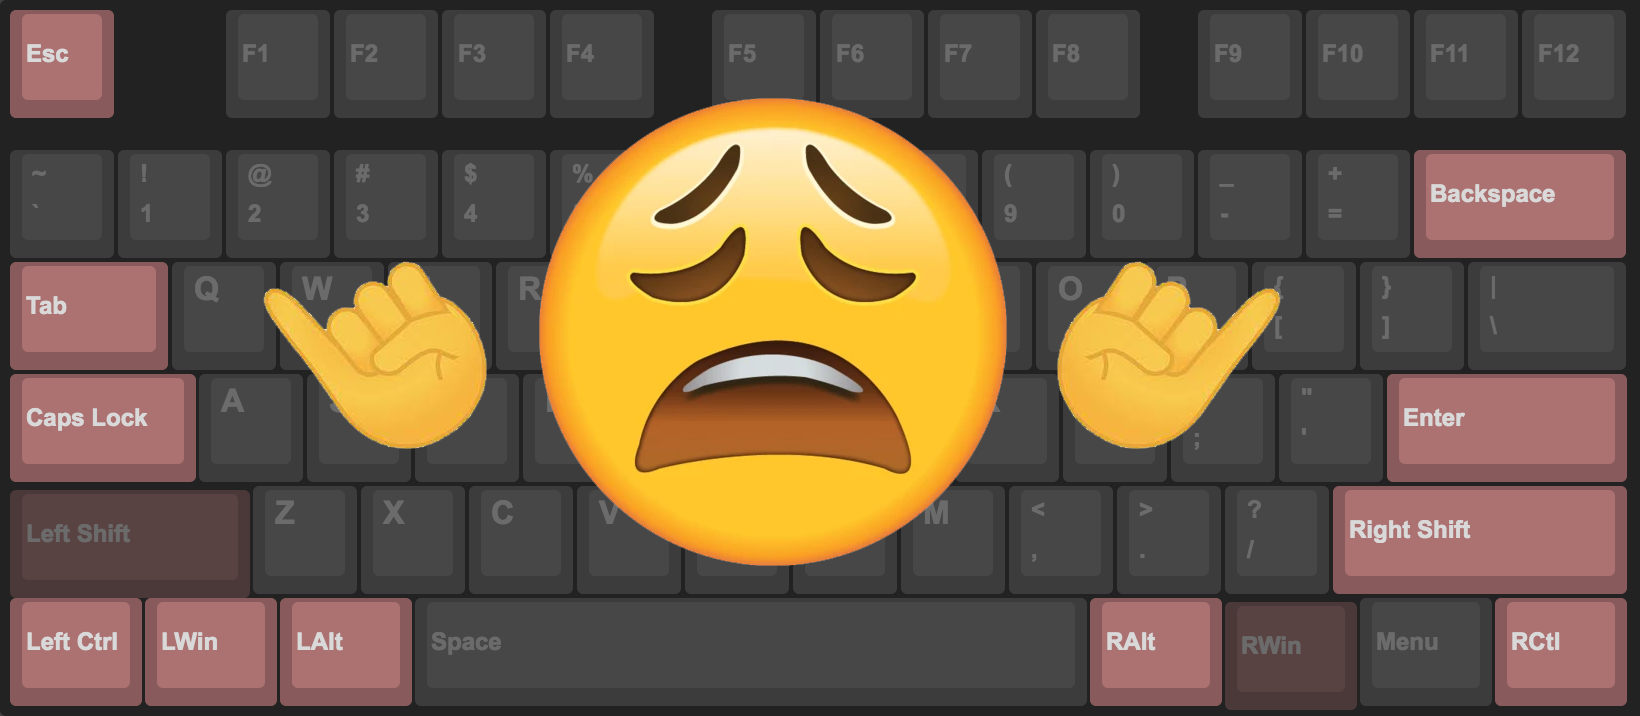 Image of a standard keyboard layout with the pinky keys highlighted and an exhausted emoji with pinky fingers stuck out.